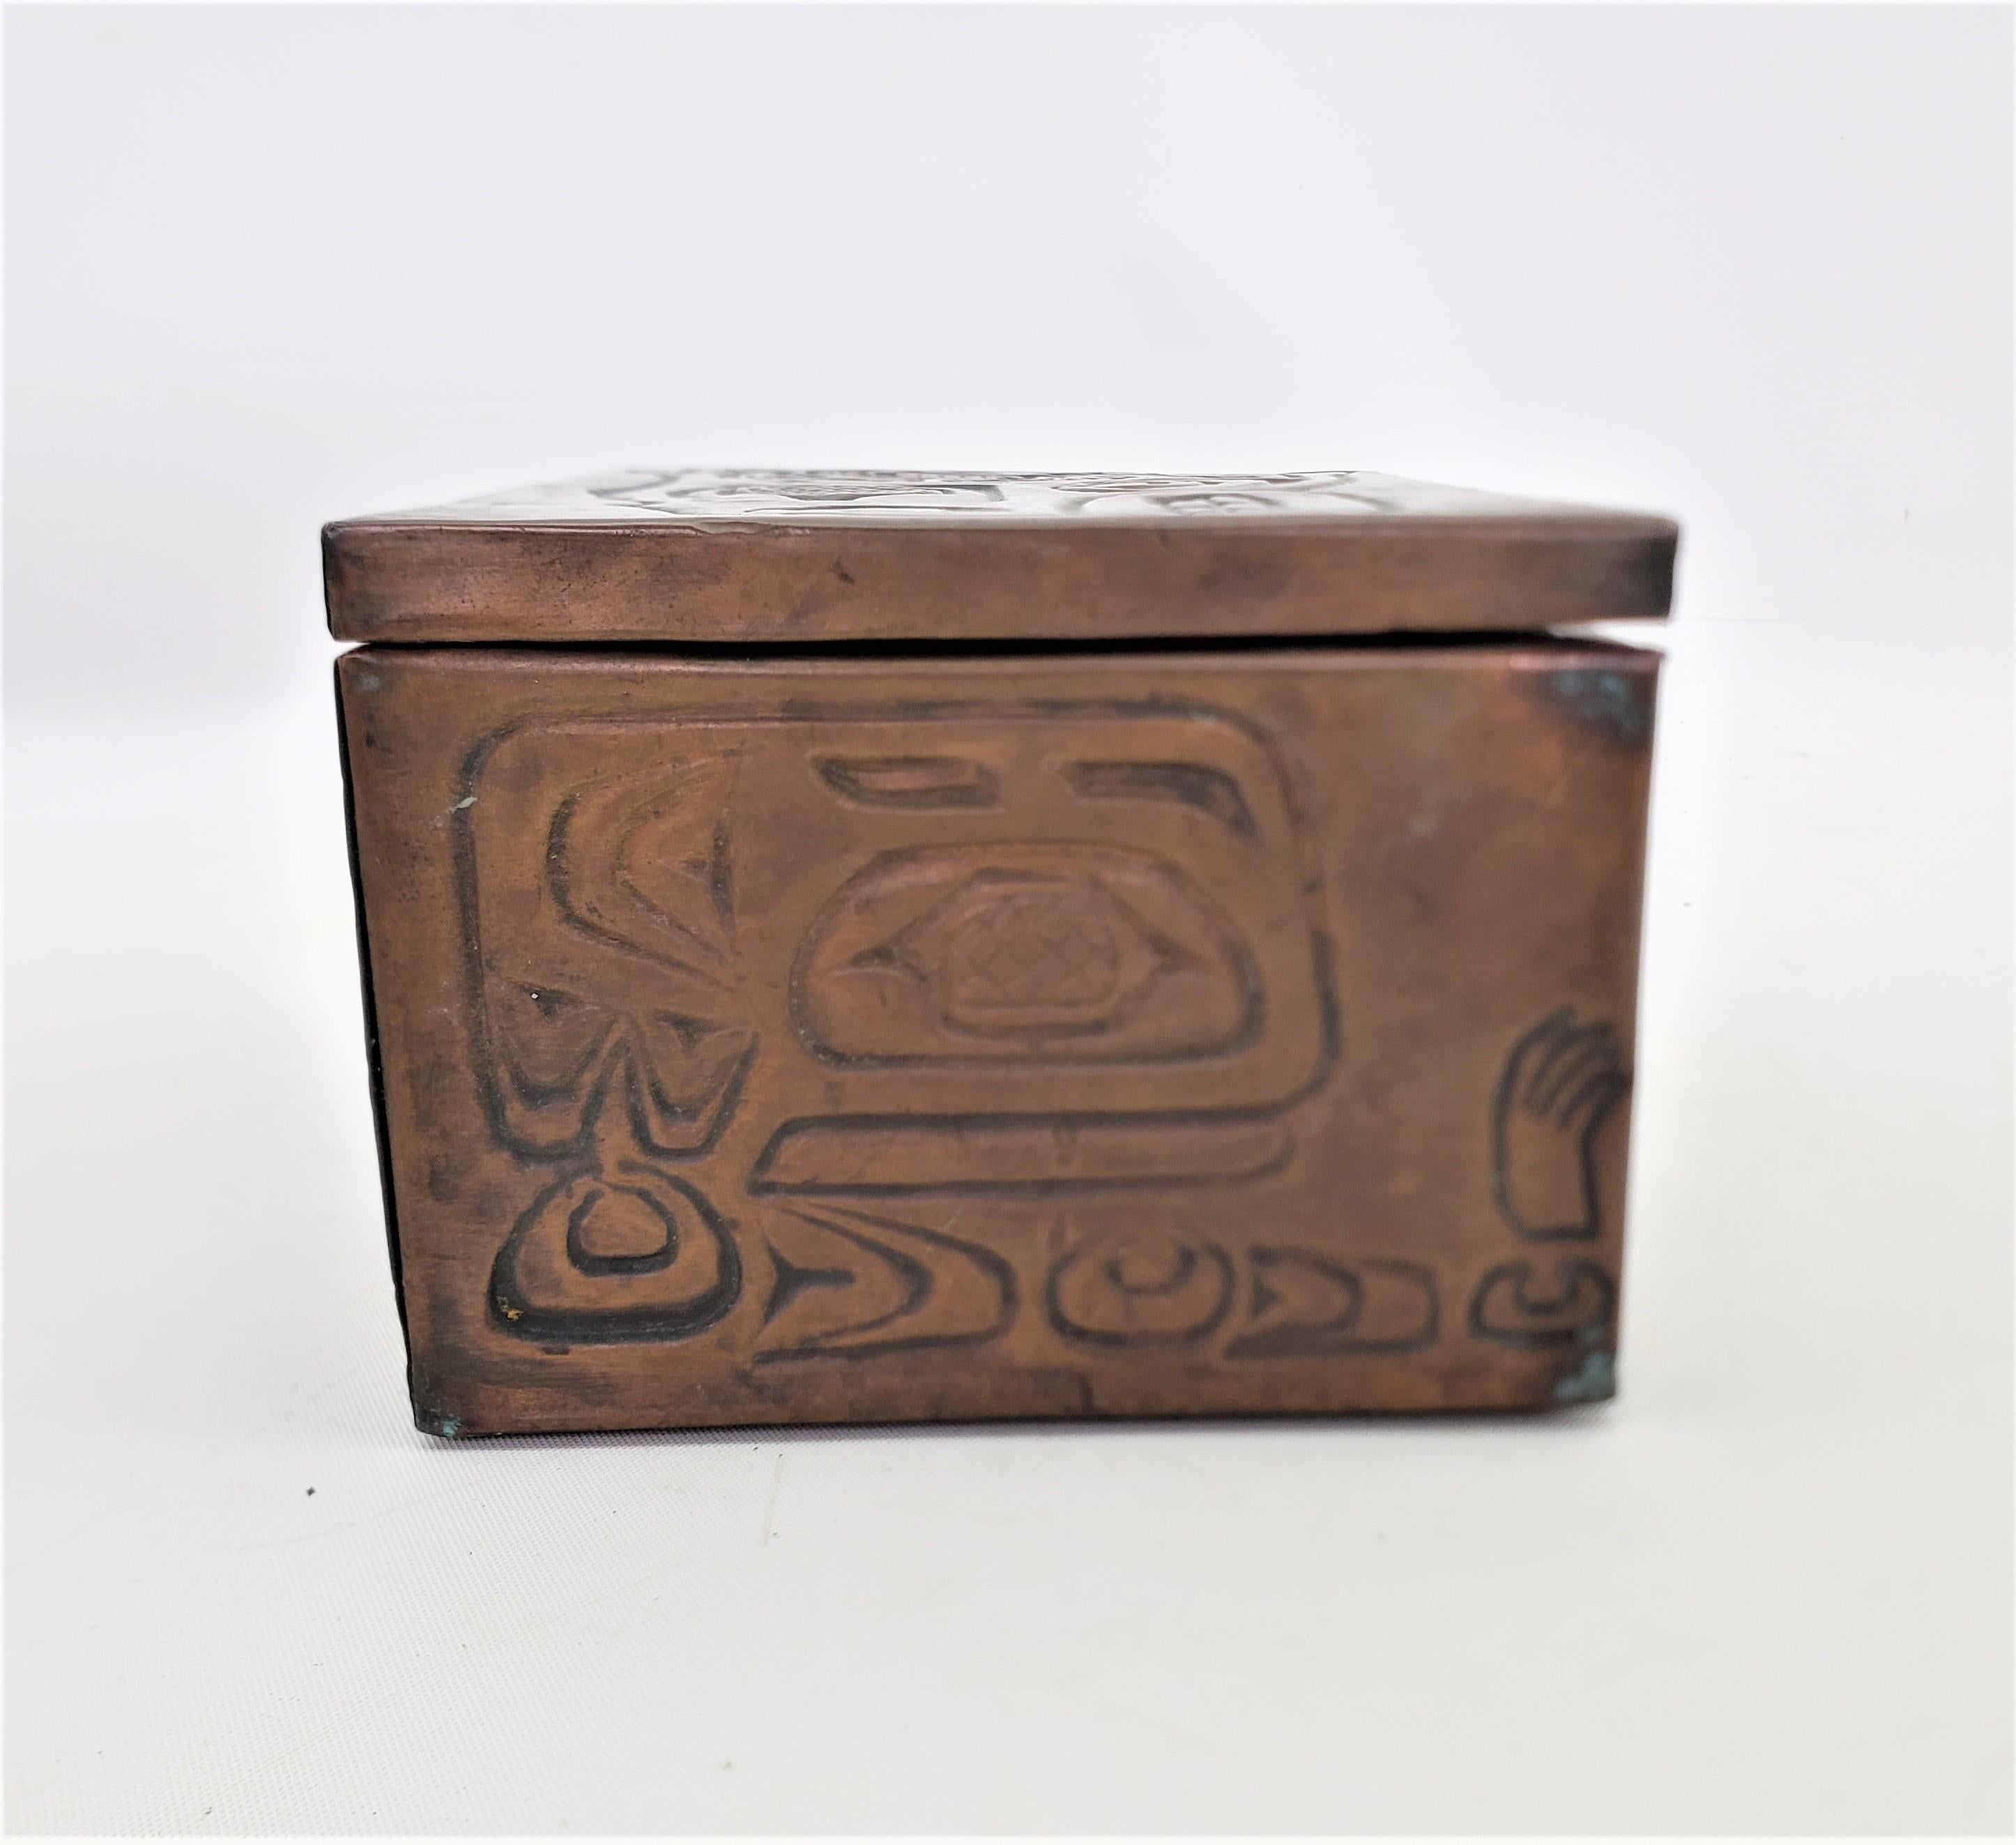 Canadian Mid-Century Era West Coast Haida Styled Copper Covered Box with Repouse Decor